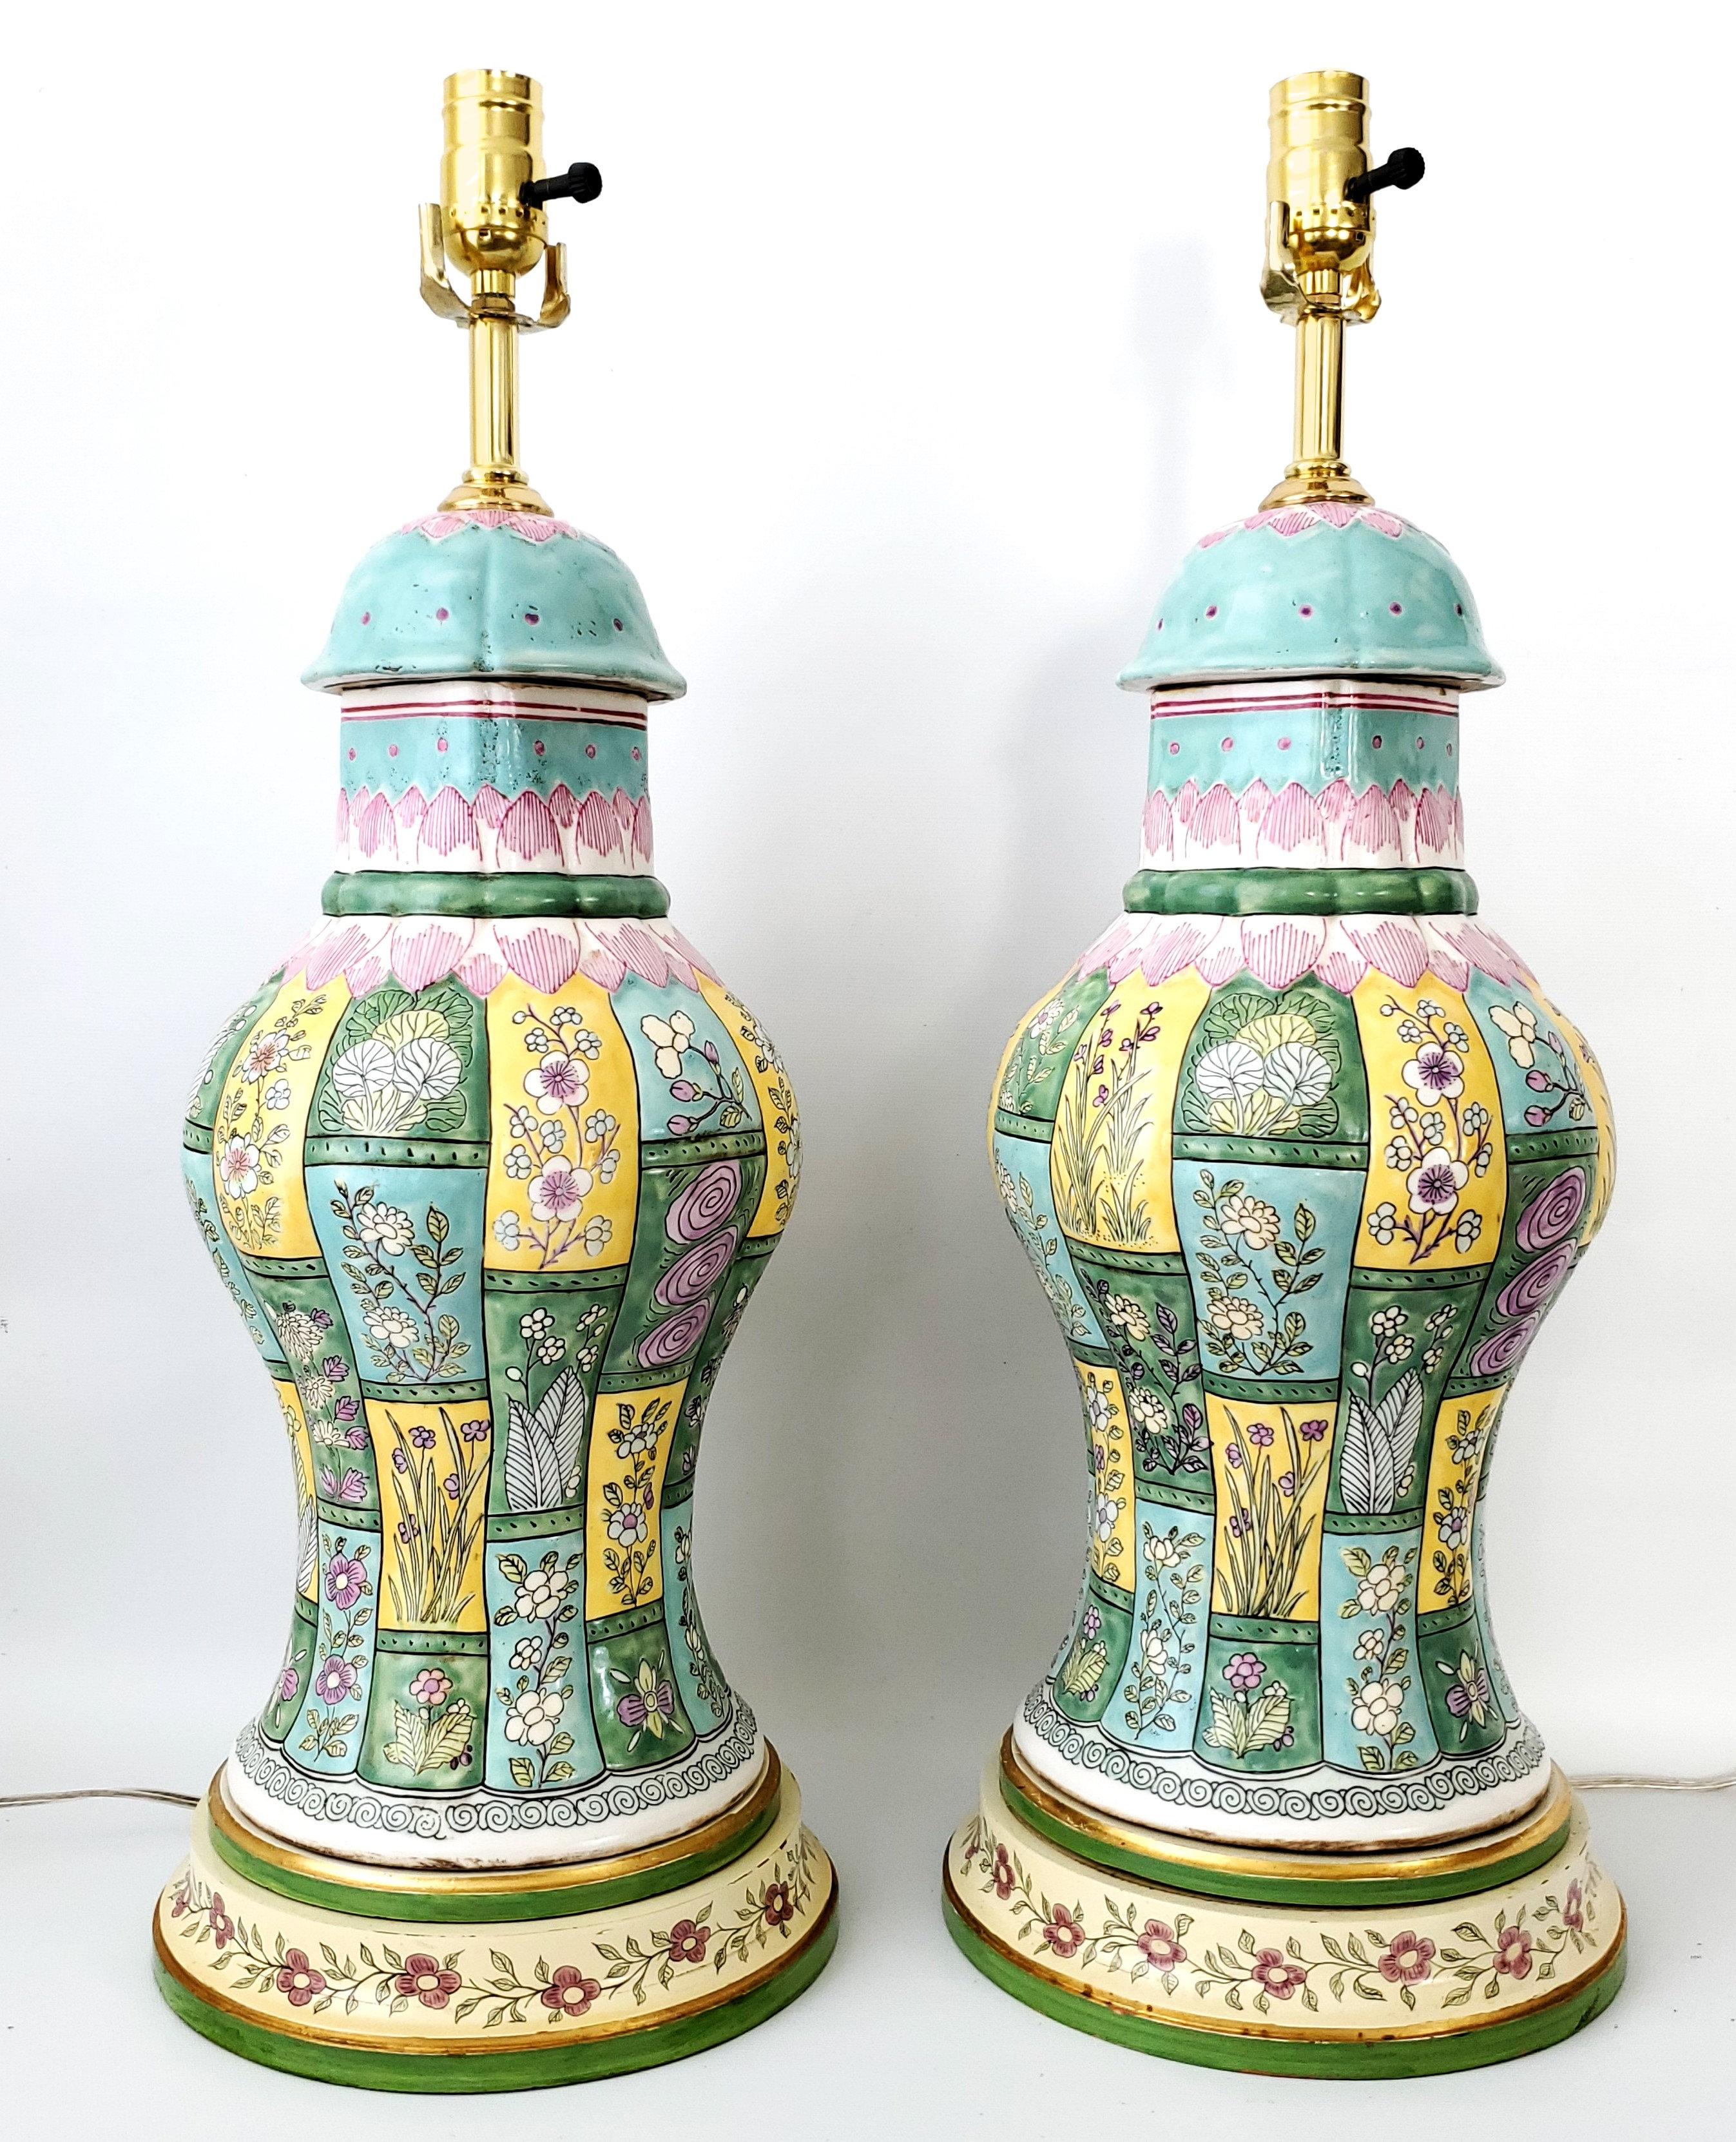 Pair of vintage Chinese porcelain ceramic table lamps baluster shaped with a heavy textural glaze. The bodies of the lamps are thick colorful porcelain with turquoise, pink, yellow, lavender and green floral and geometric designs. The wooden bases